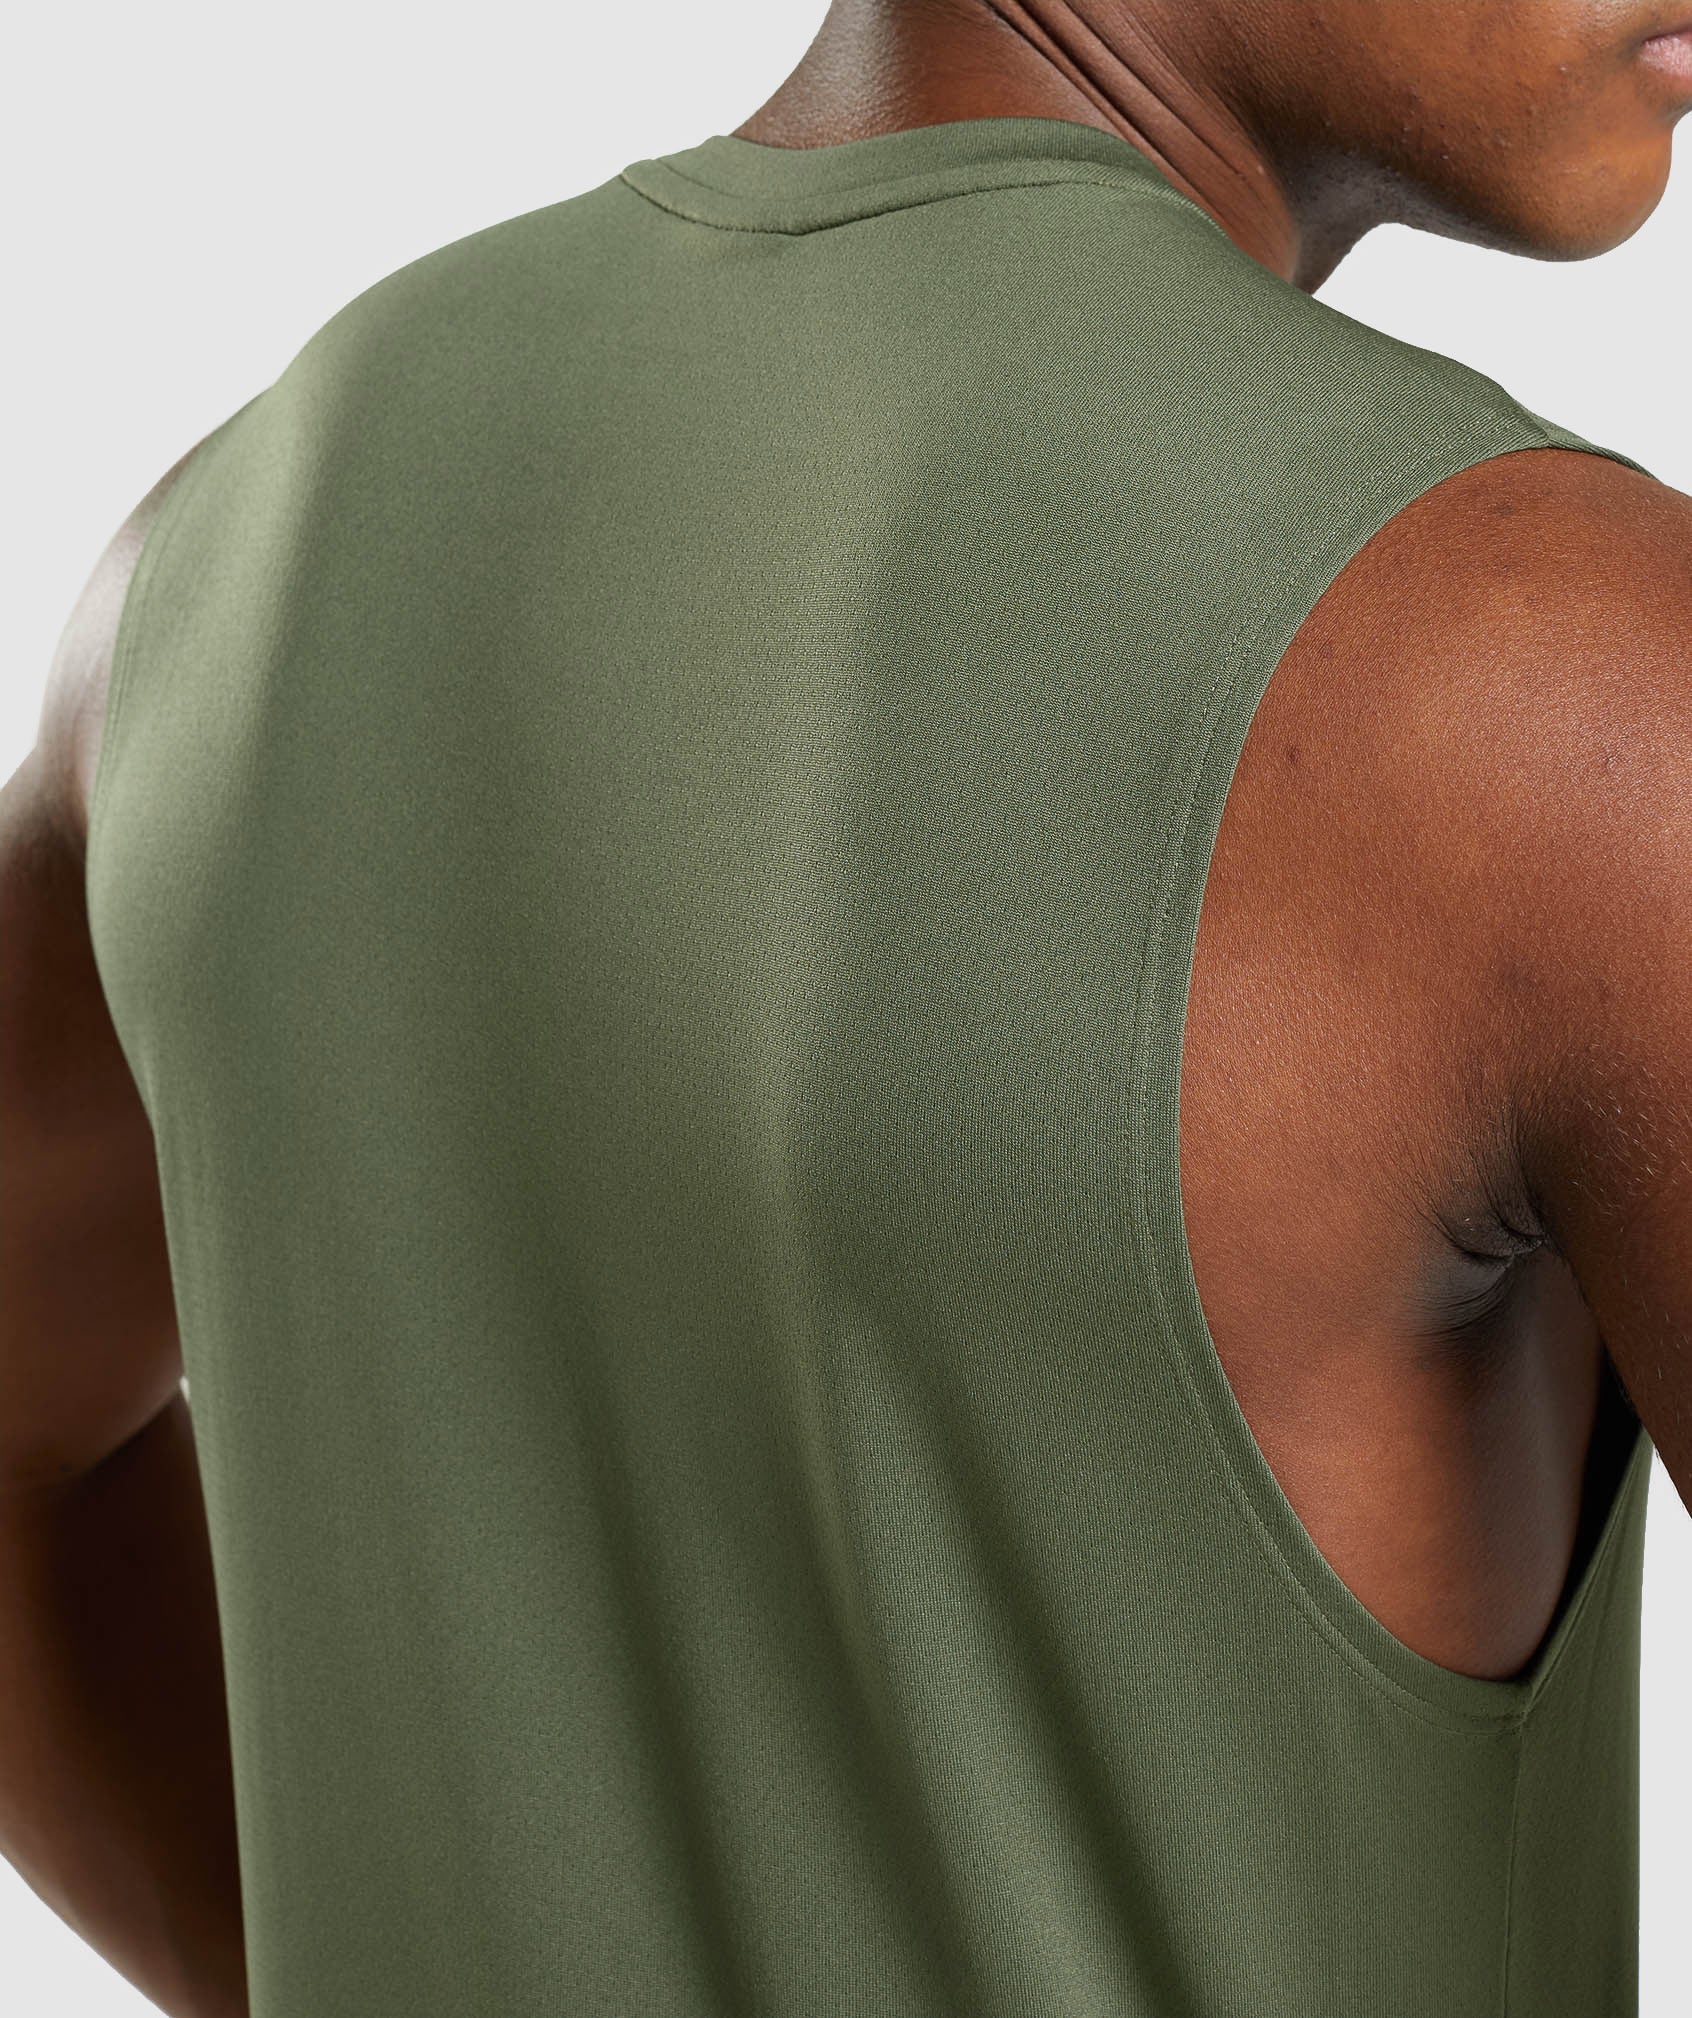 Arrival Sleeveless T-Shirt in Core Olive - view 6